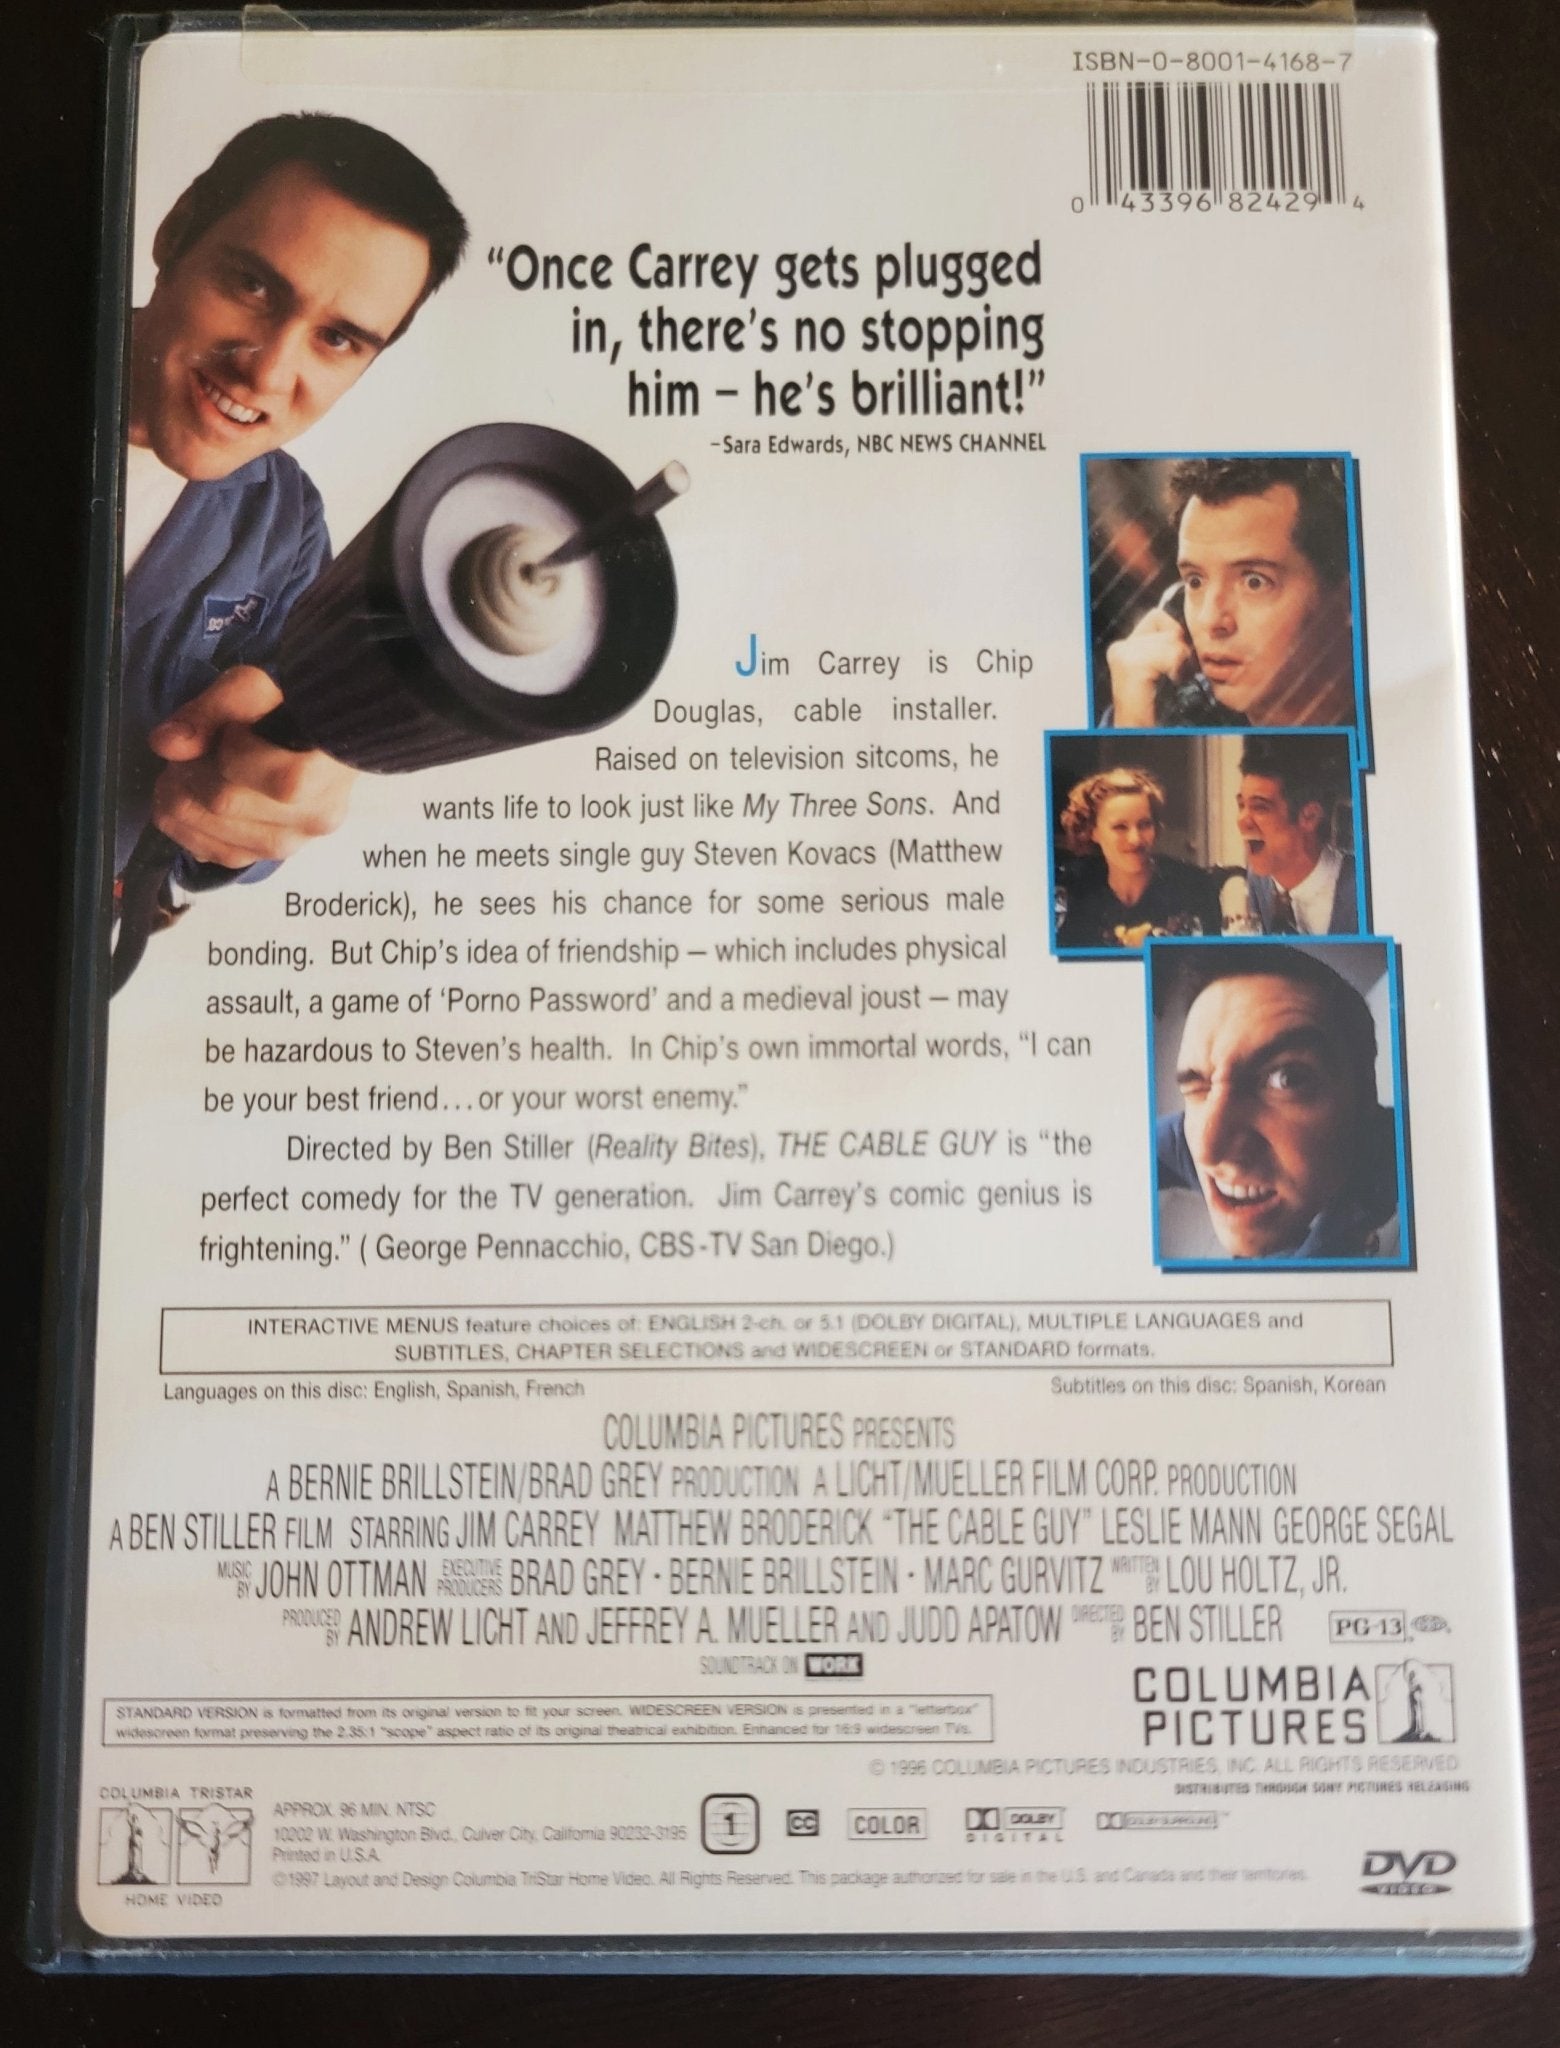 Columbia Pictures - The Cable Guy | DVD | Widescreen & Standard Format - DVD - Steady Bunny Shop